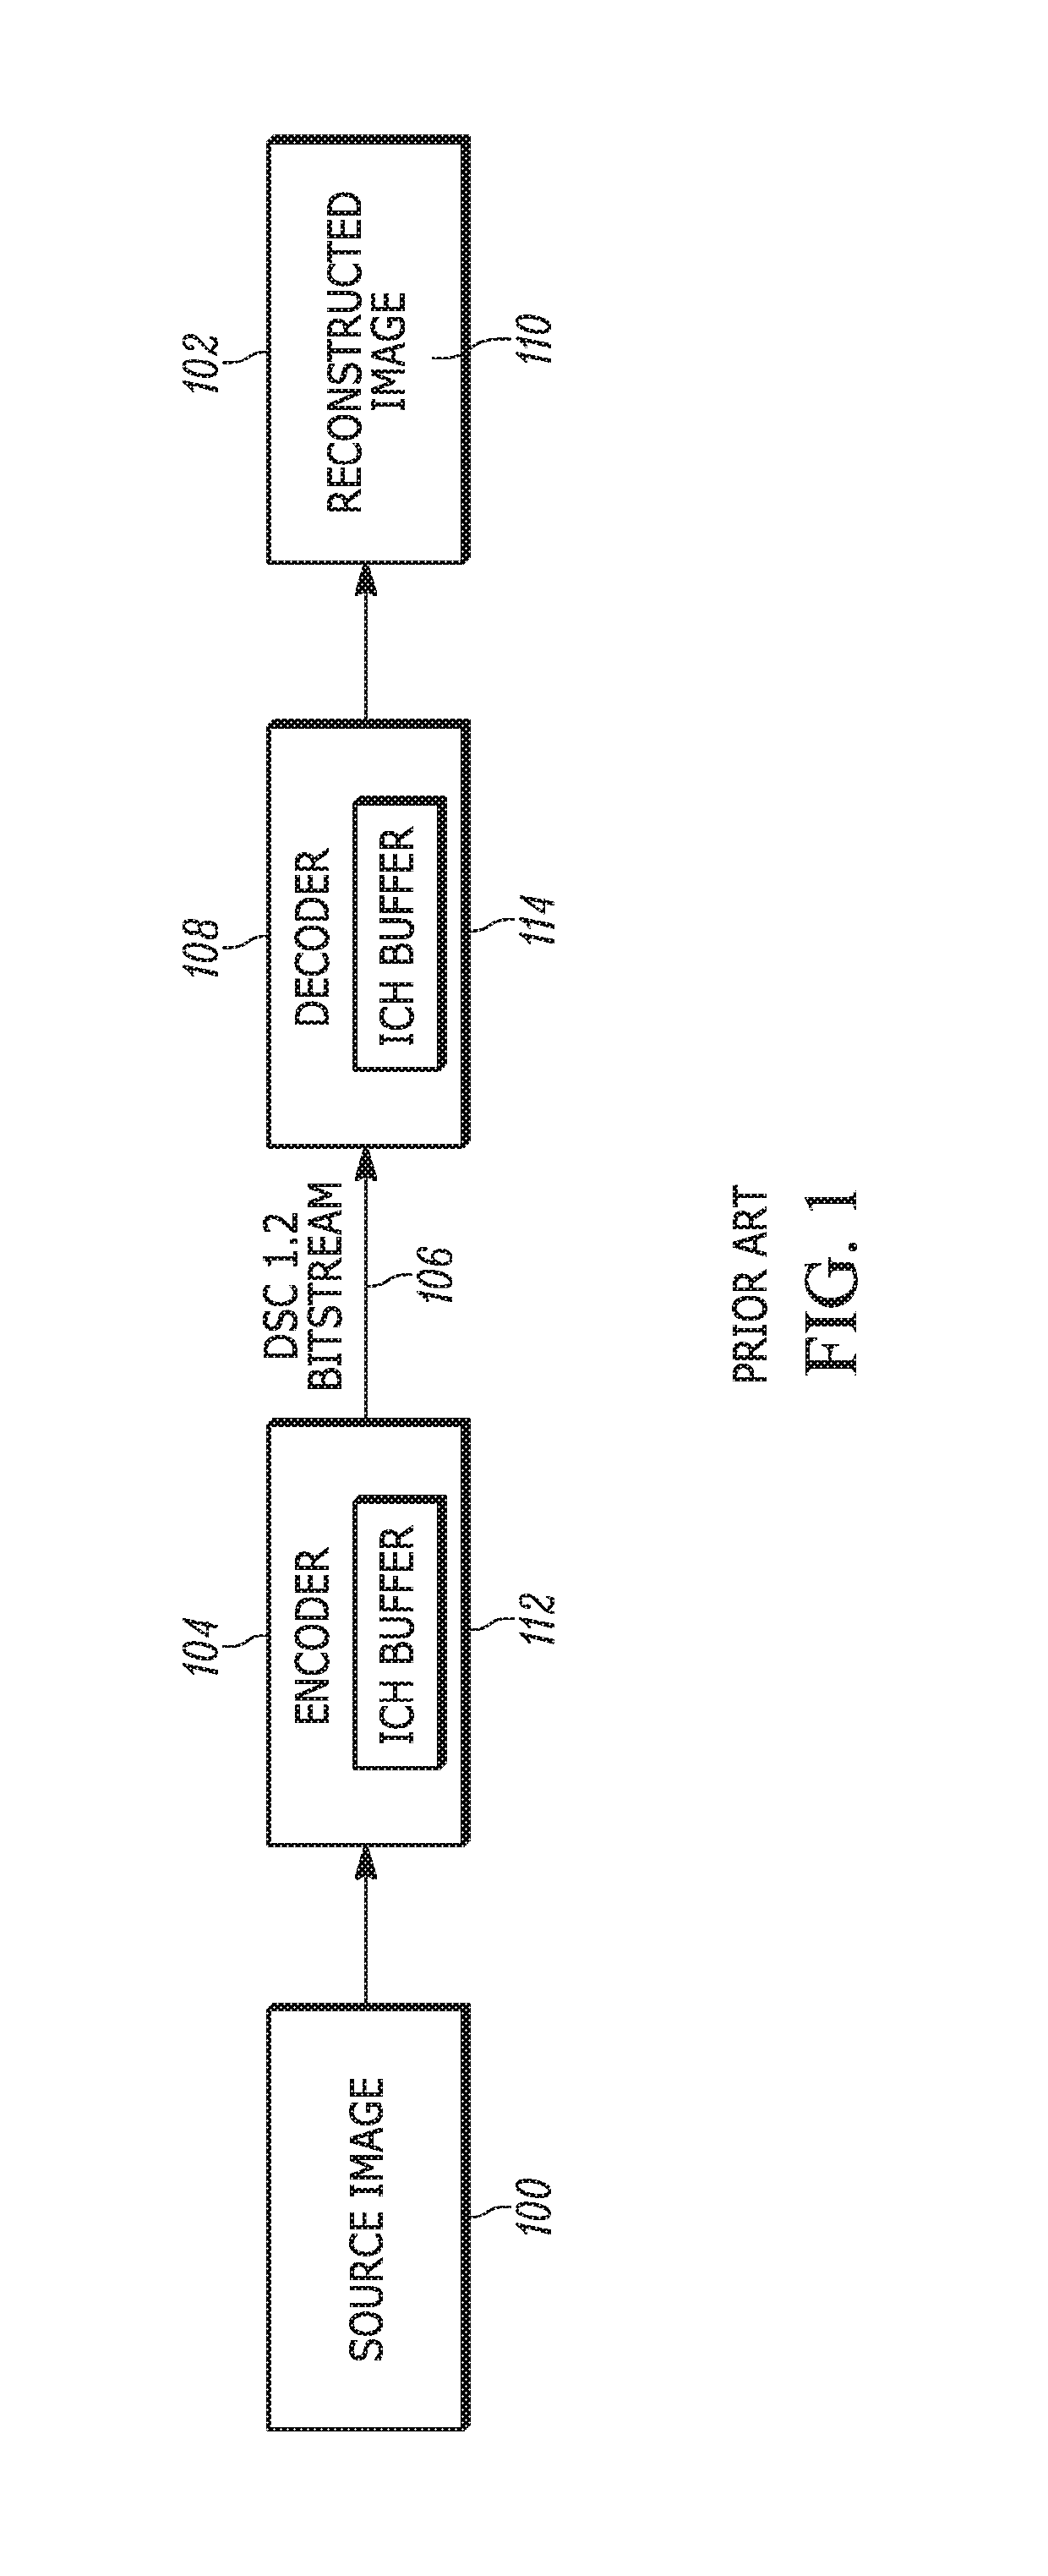 Method and apparatus for image compression that employs multiple indexed color history buffers